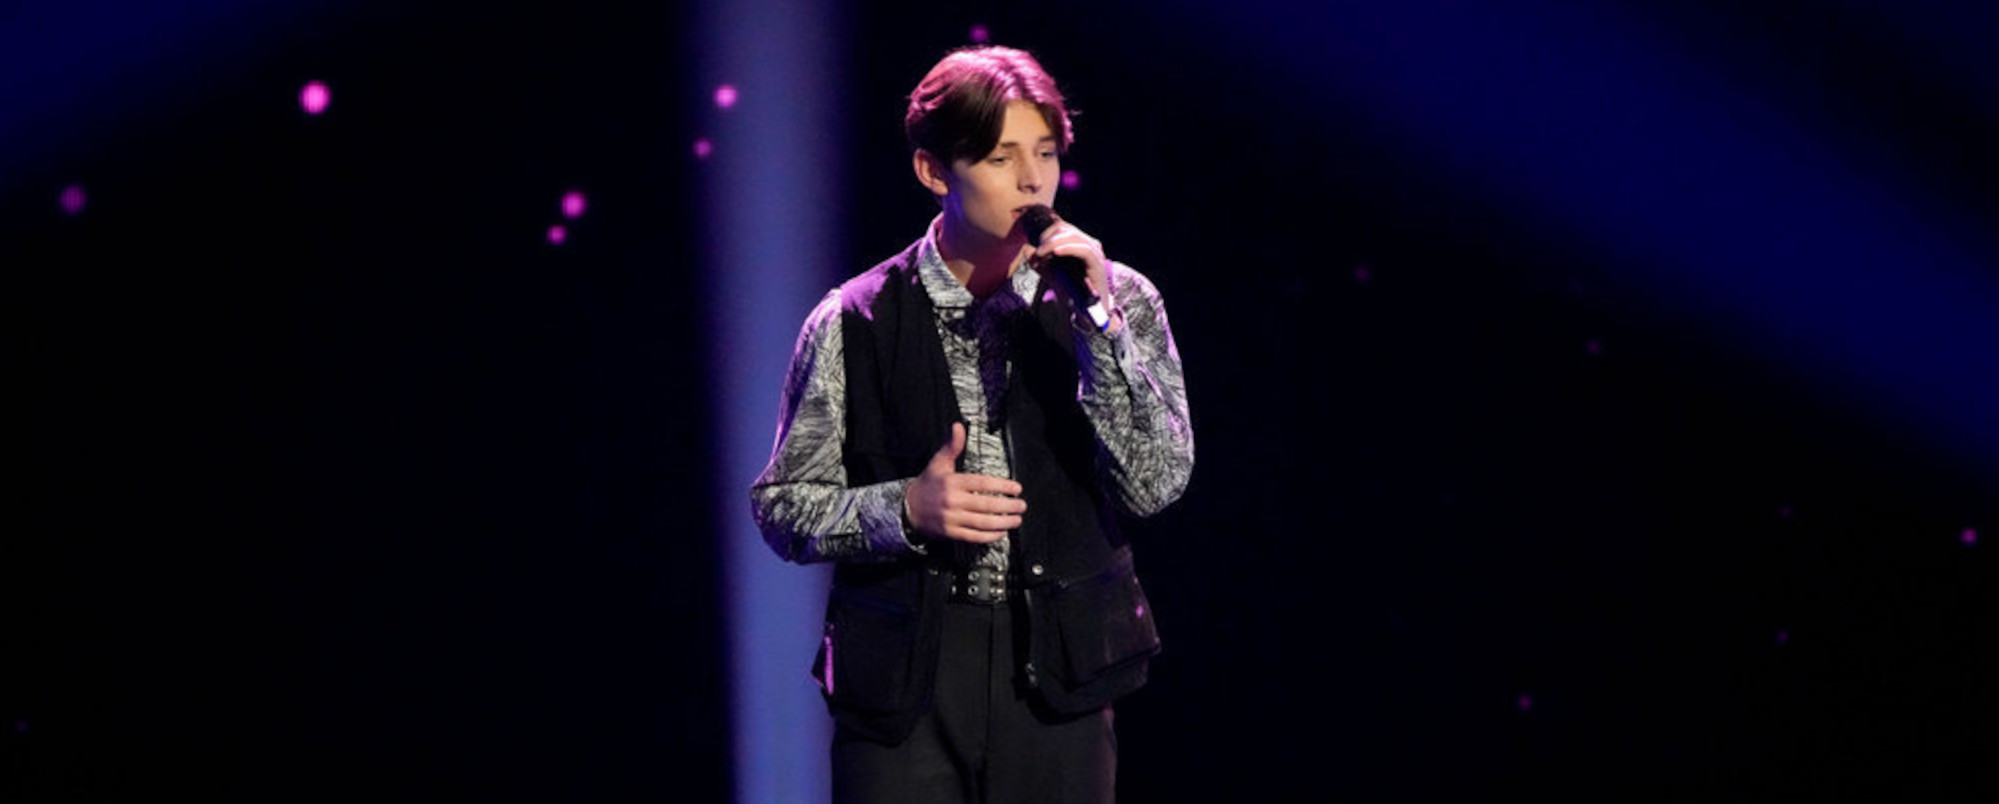 15-Year-Old Ryley Tate Wilson Gets Quick 4-Chair Turn on ‘The Voice’